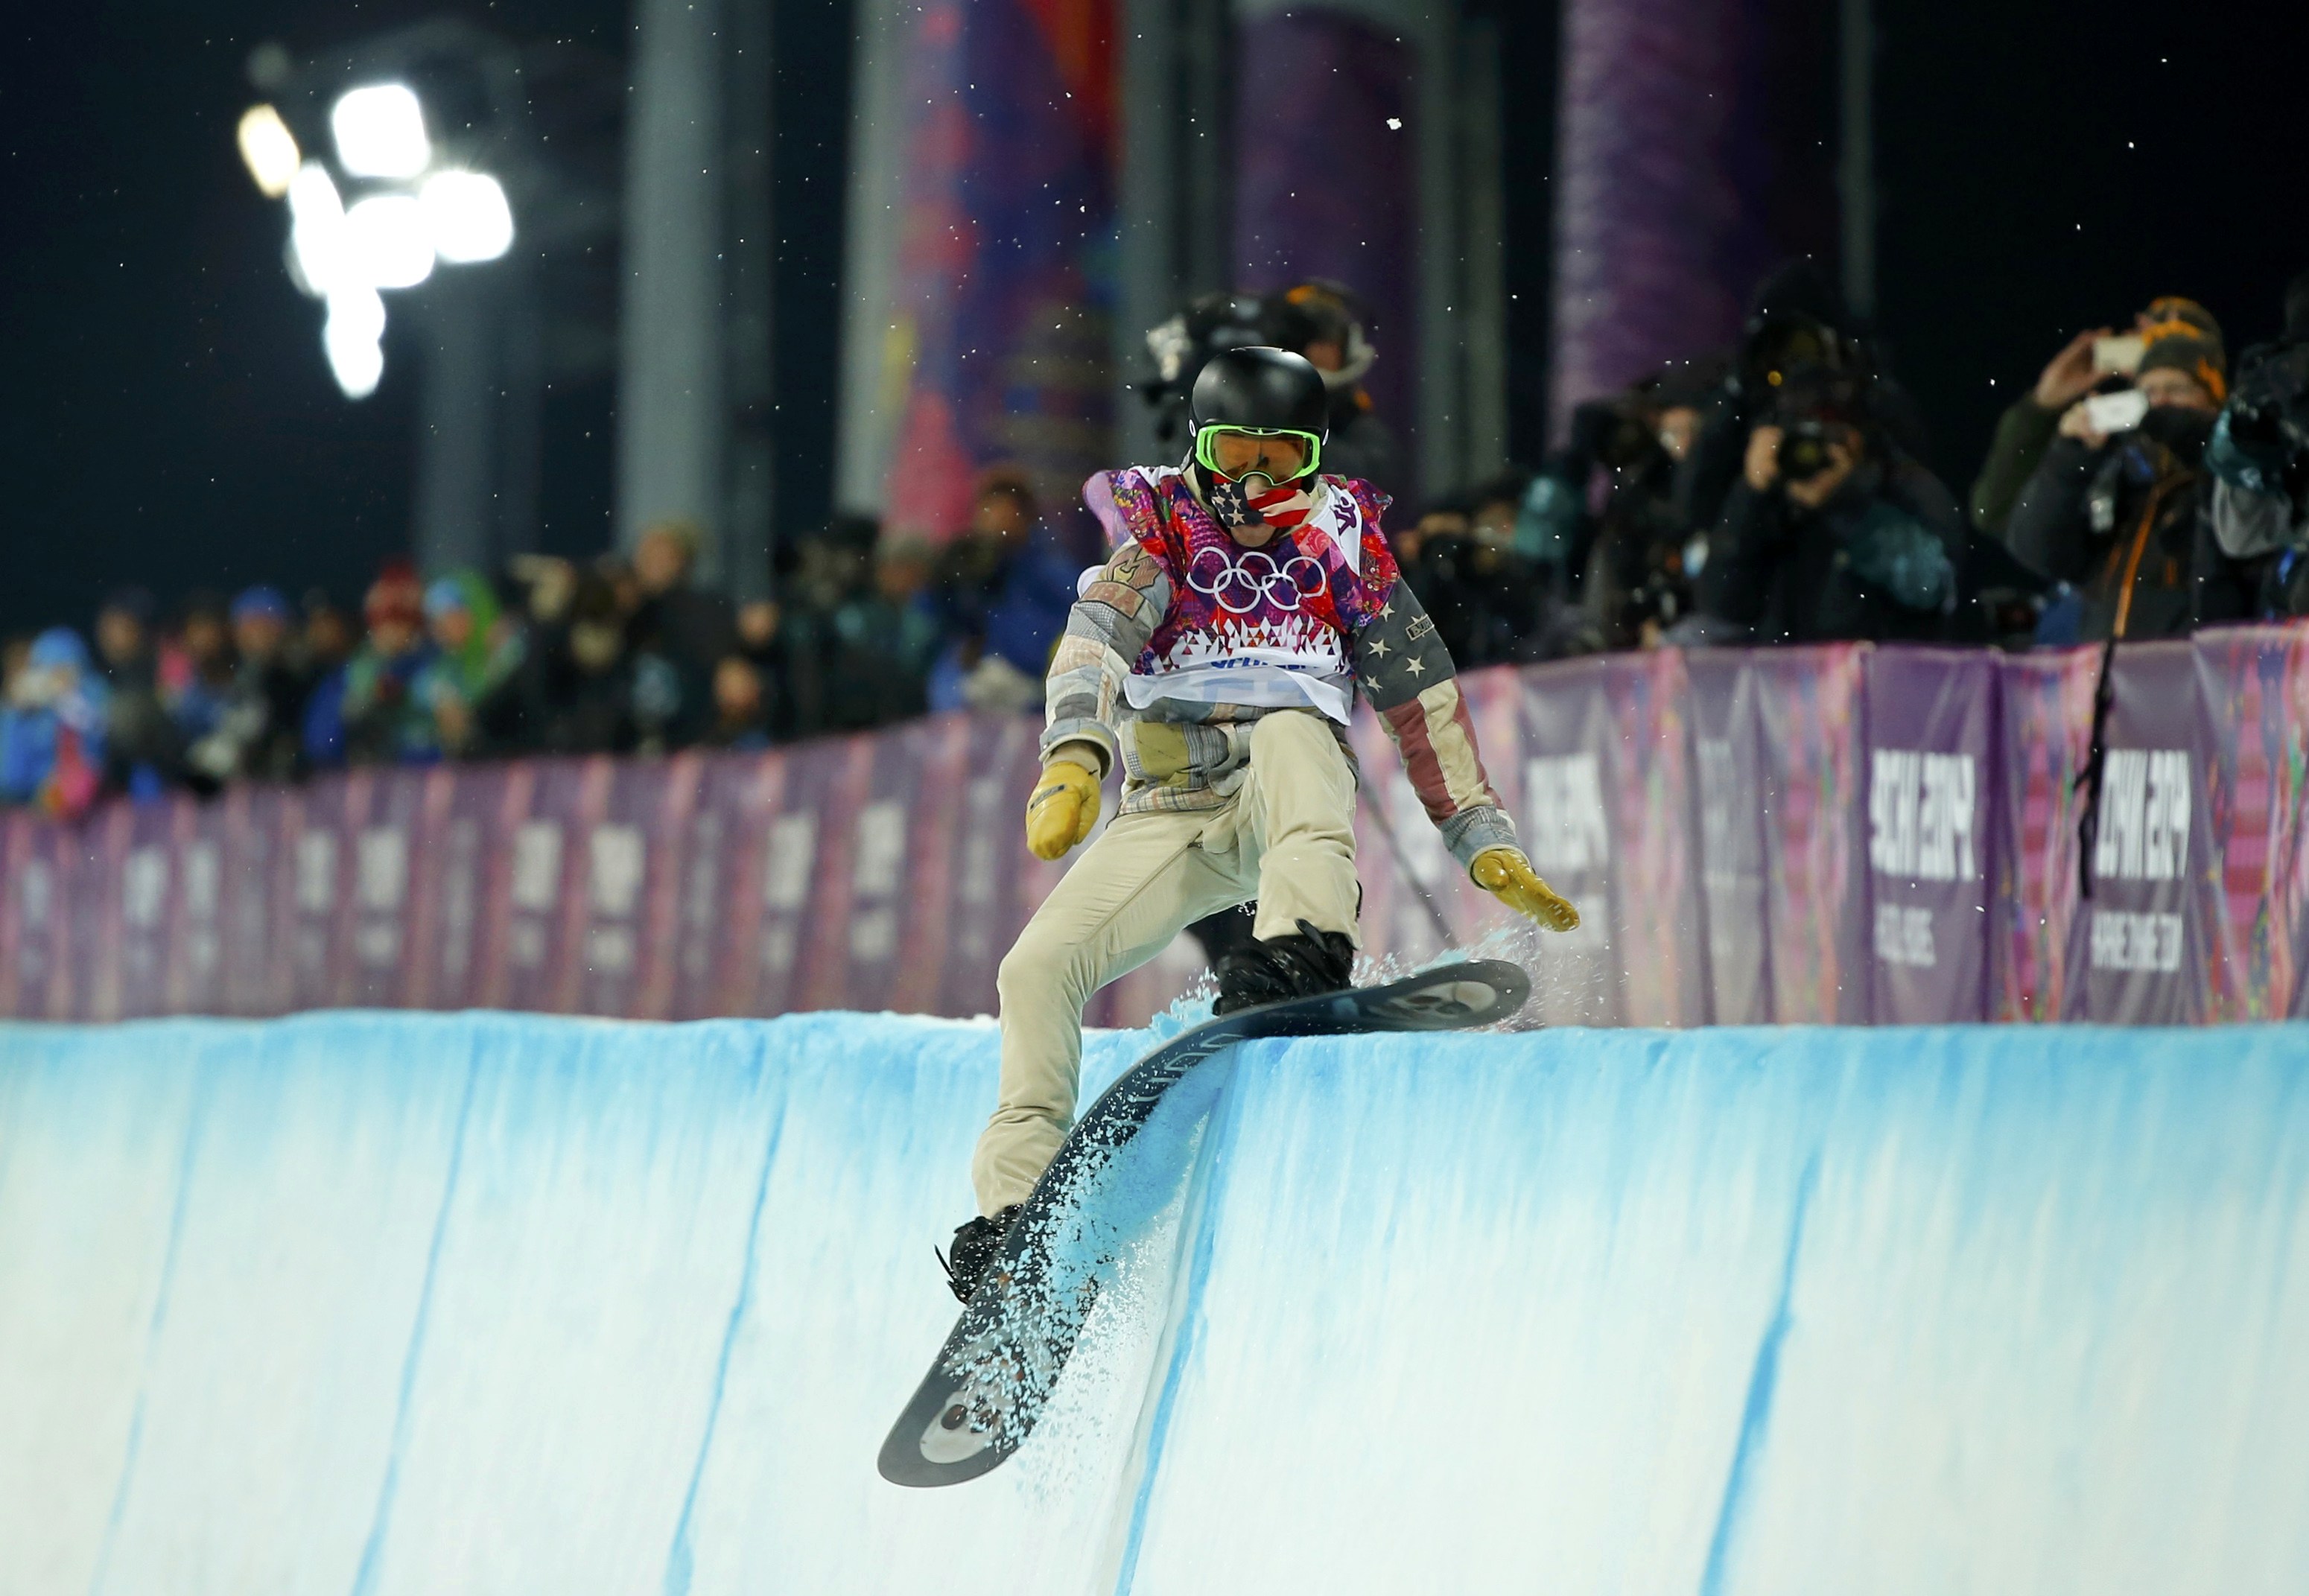 Sochi Olympics Day Shaun White Lands In 4th Place